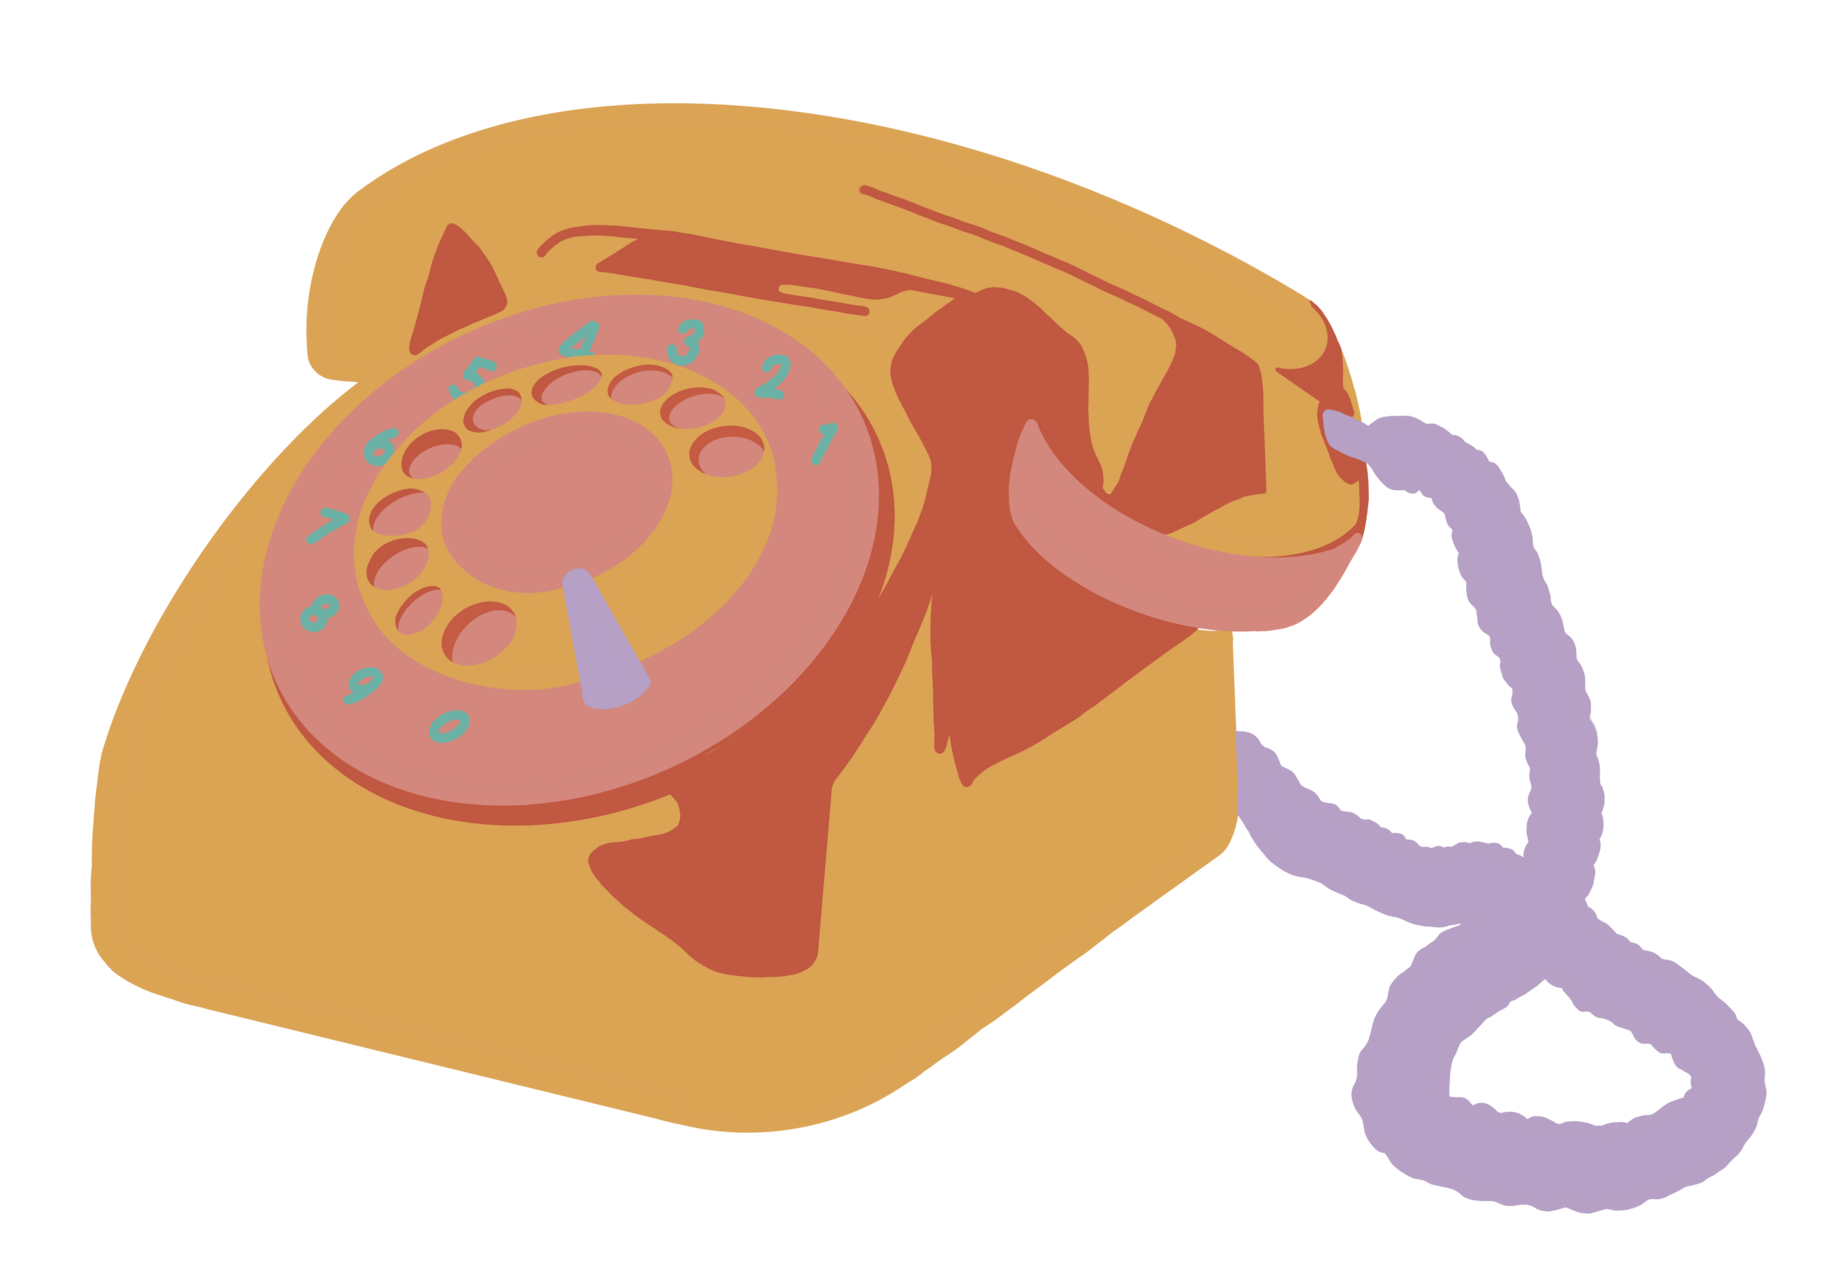 illustration of an old spin dial telephone